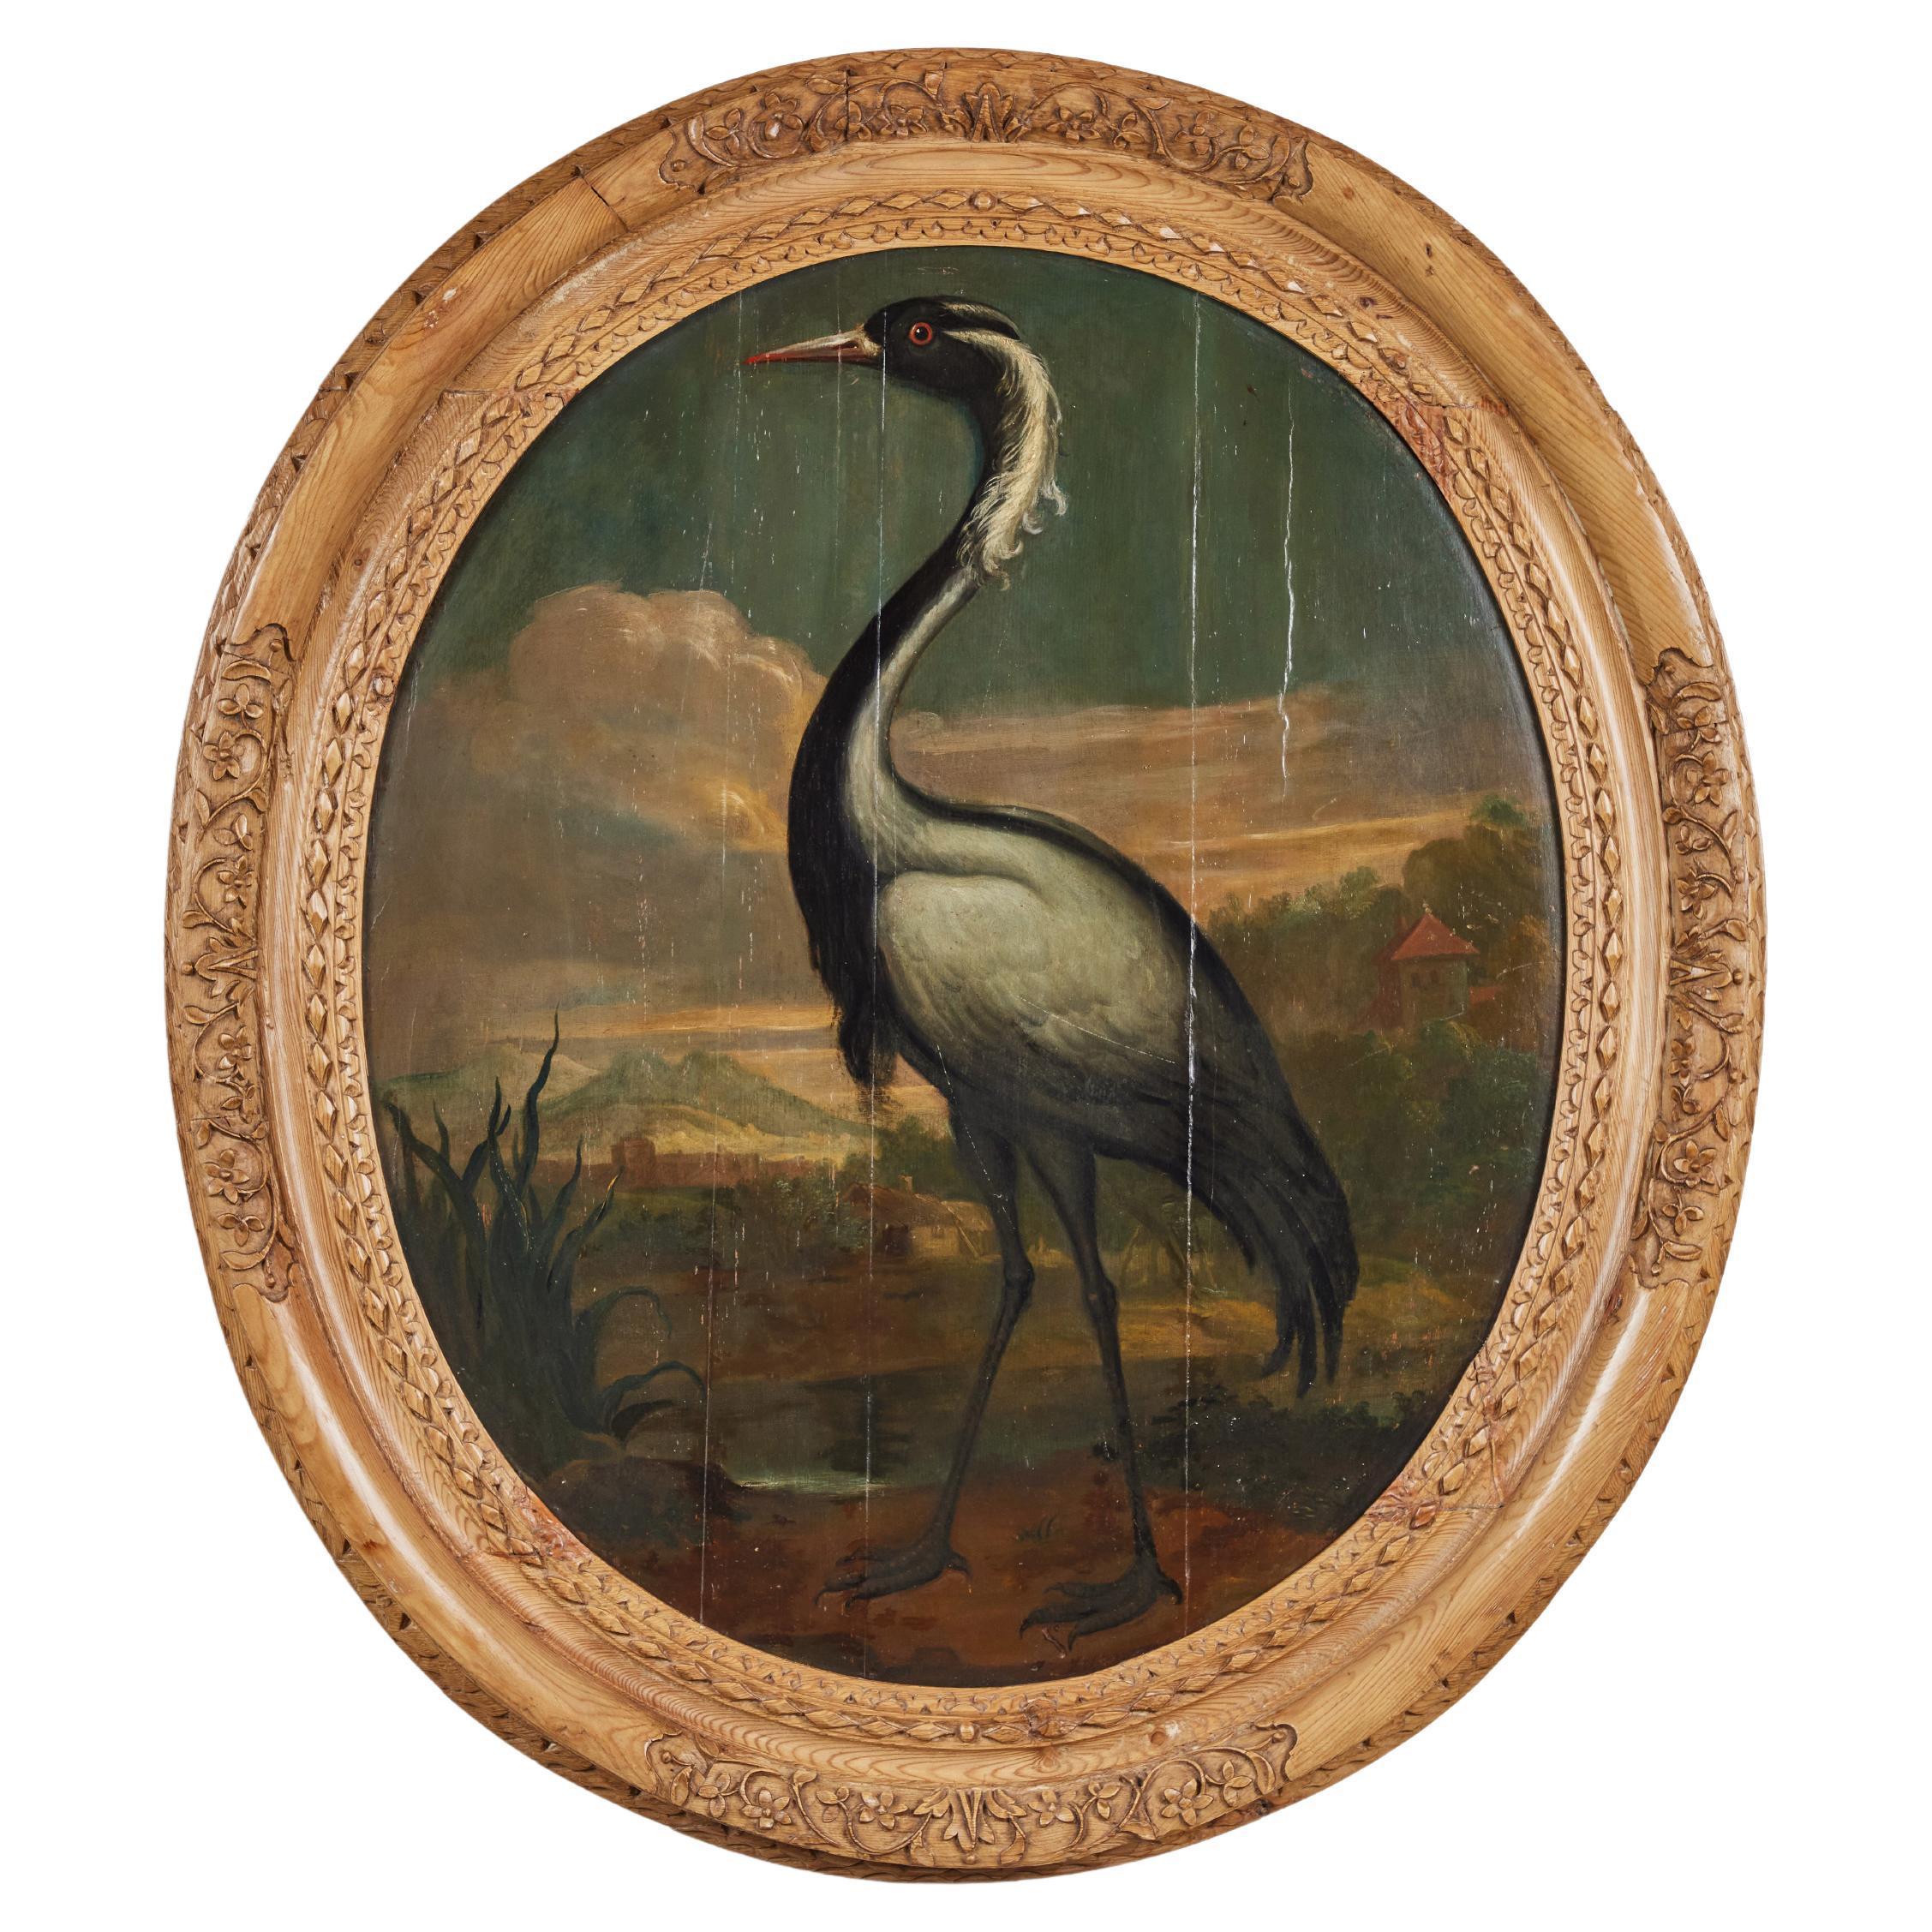 A rare, richly hand-painted, 18th century oil-on-panel portrait of a crane set against a moody sky amidst a lush landscape of mountains, forest, architecture, and water. Held in a newer, relief carved, foliate embellished frame. Private collection,